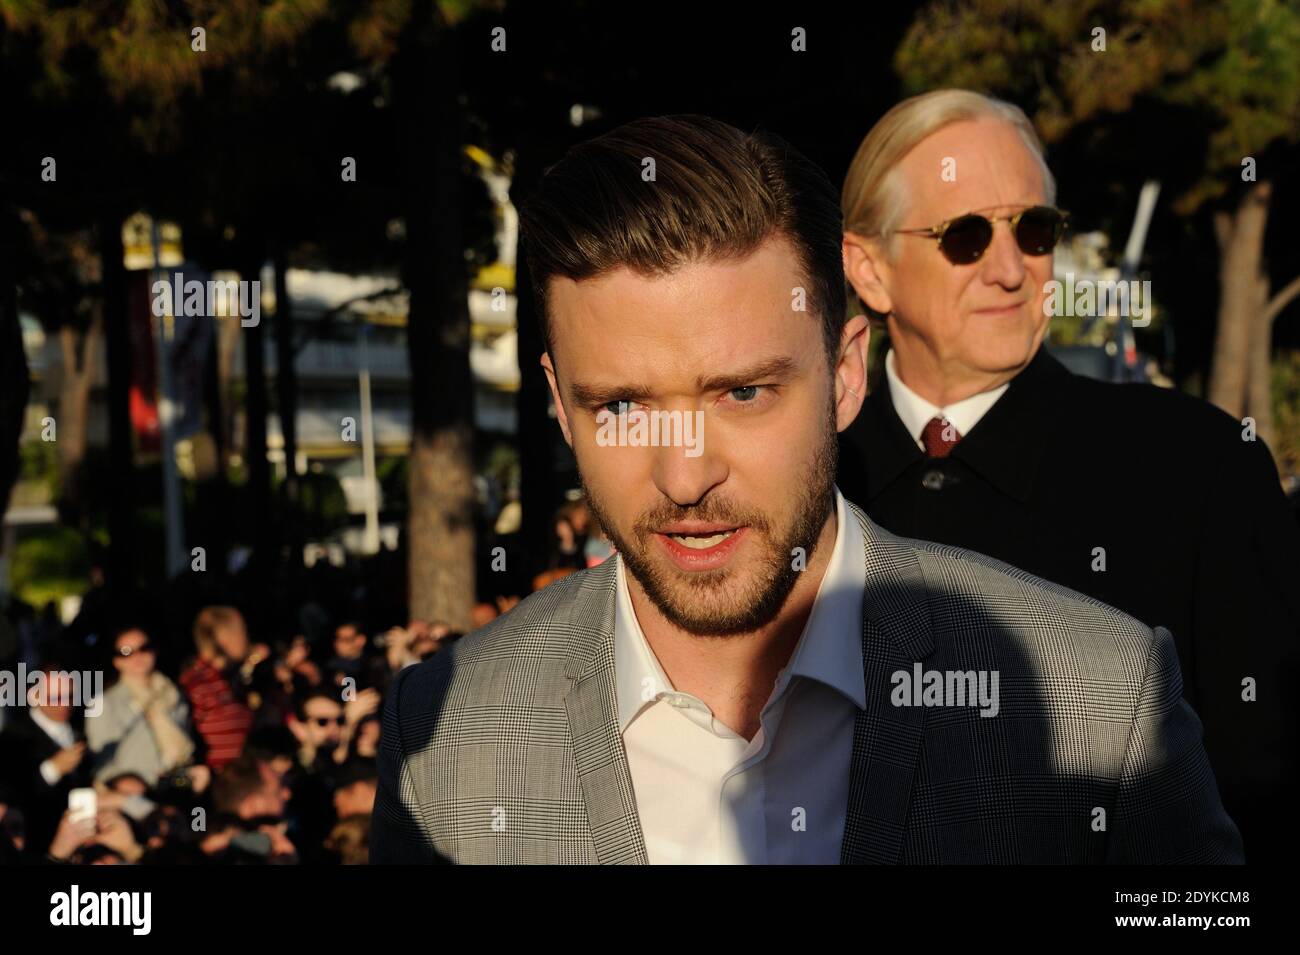 Justin Timberlake appearing on Canal + TV show Le Grand Journal during the  66th Cannes Film Festival in Cannes, France on May 21, 2013. Photo by Alban  Wyters/ABACAPRESS.COM Stock Photo - Alamy